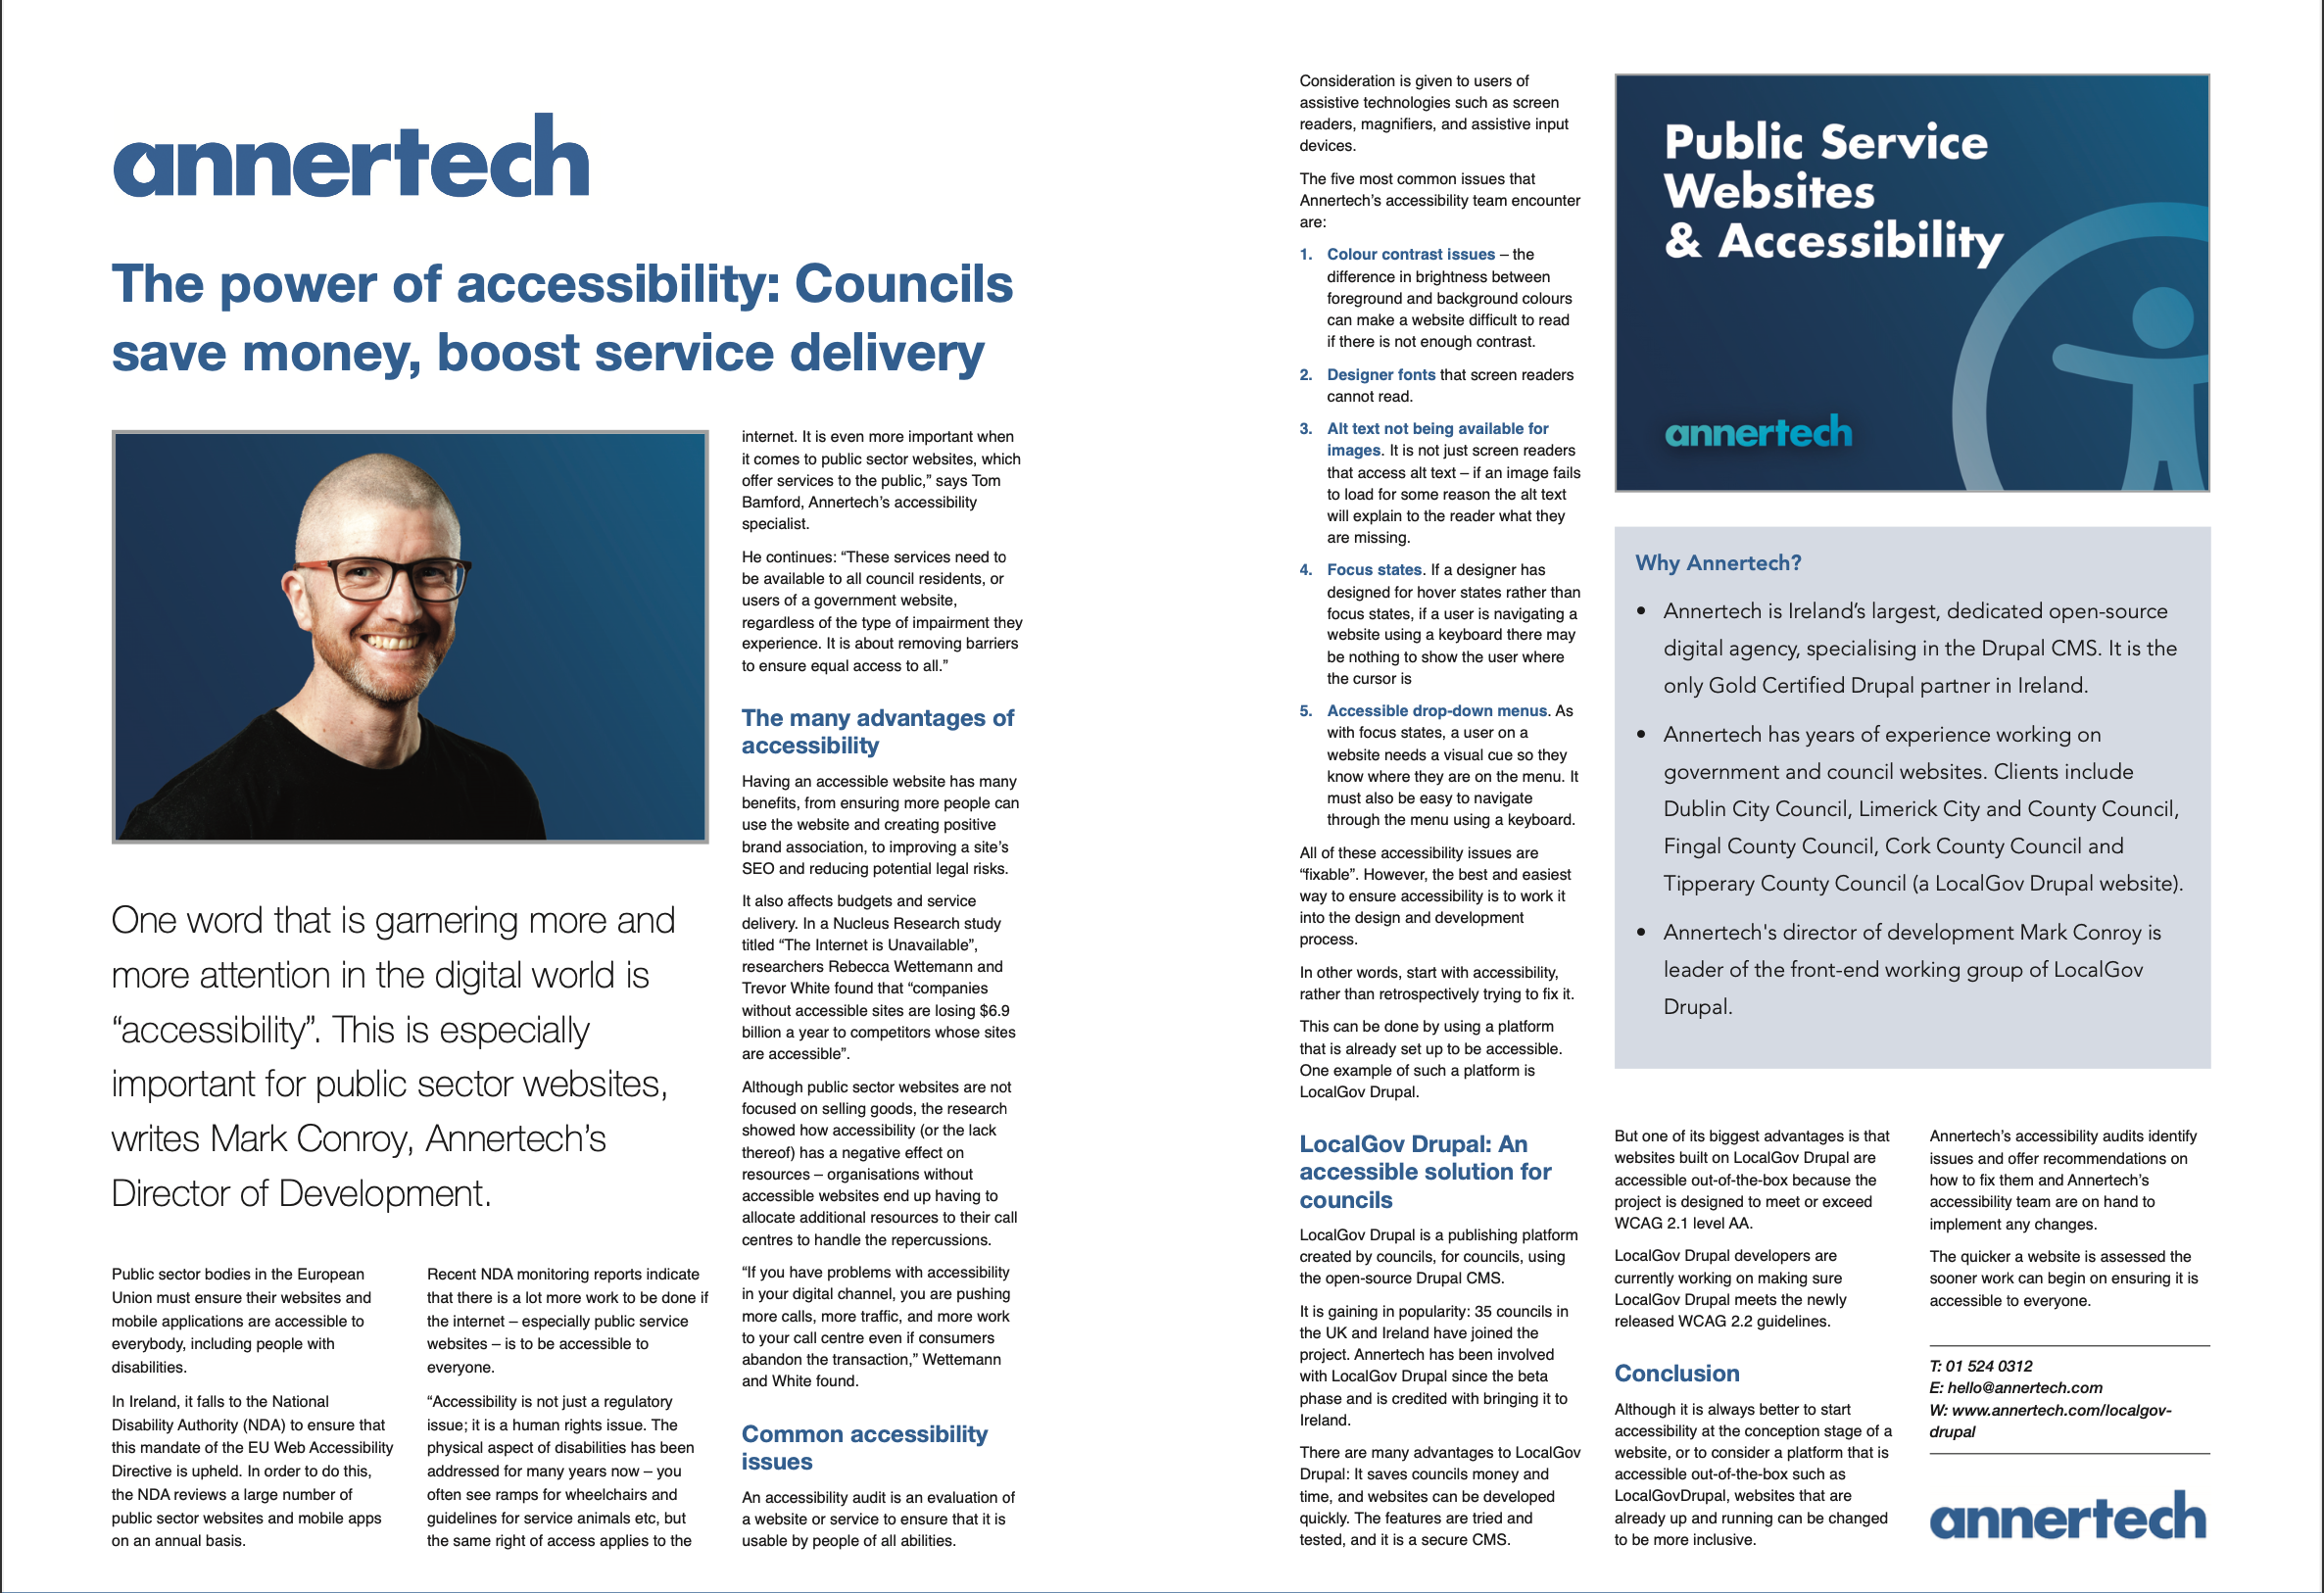 The power of accessibility: Councils save money, boost service delivery